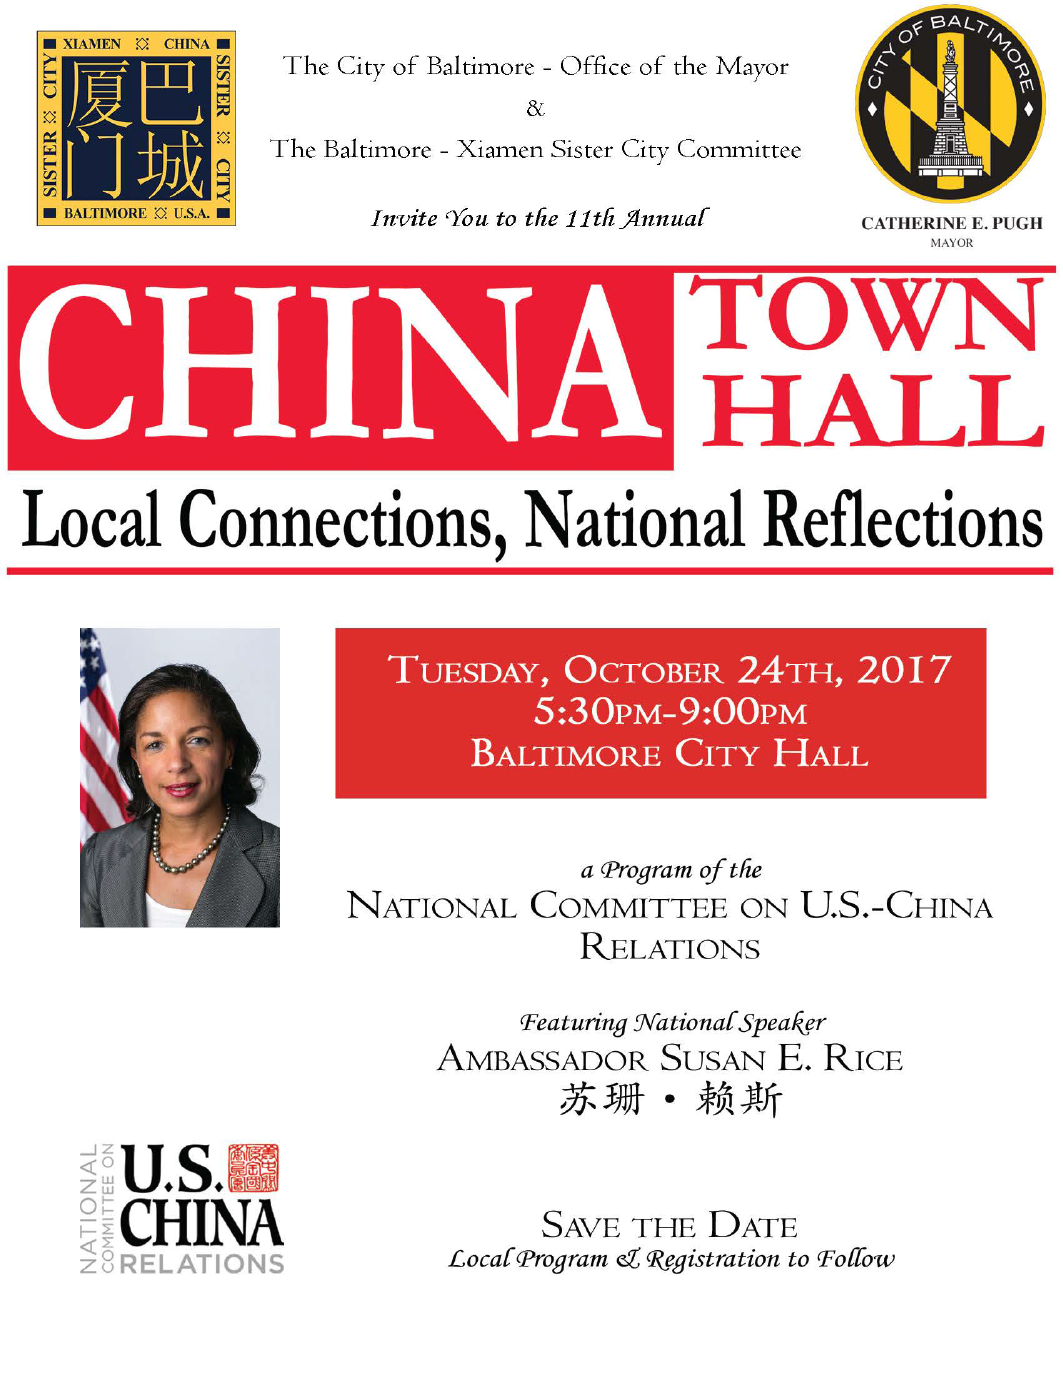 China Town Hall 2017 save-the-date flyer image